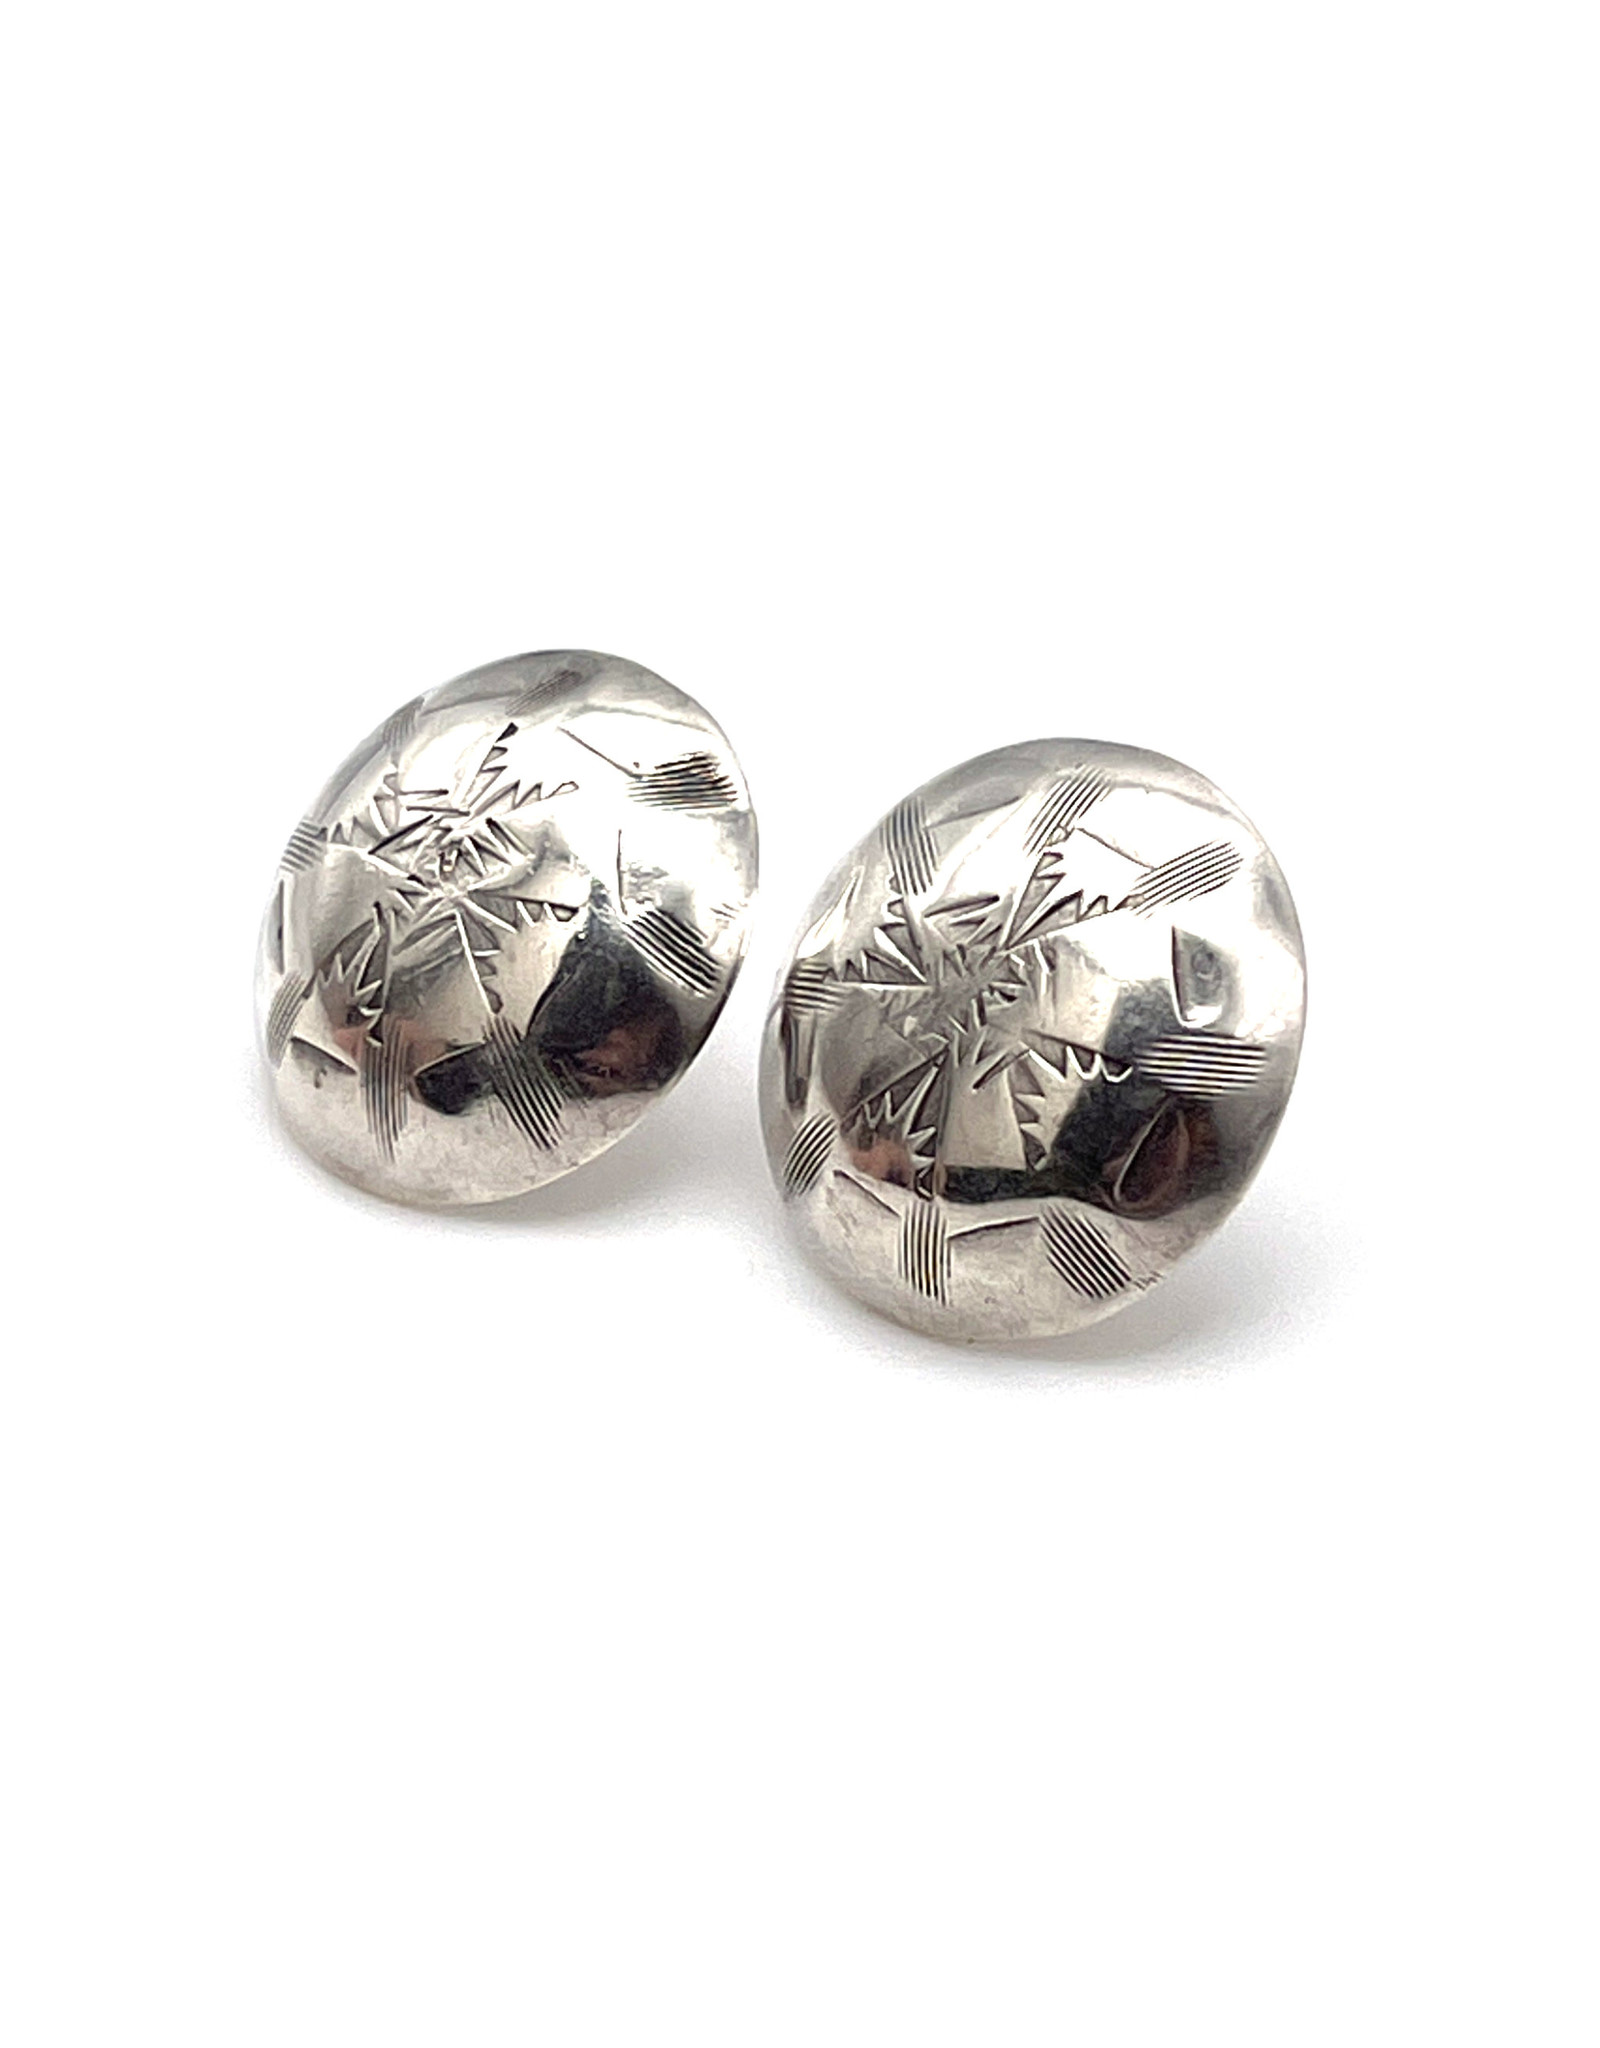 Circular Silver Earrings with Rough Western-Style Design